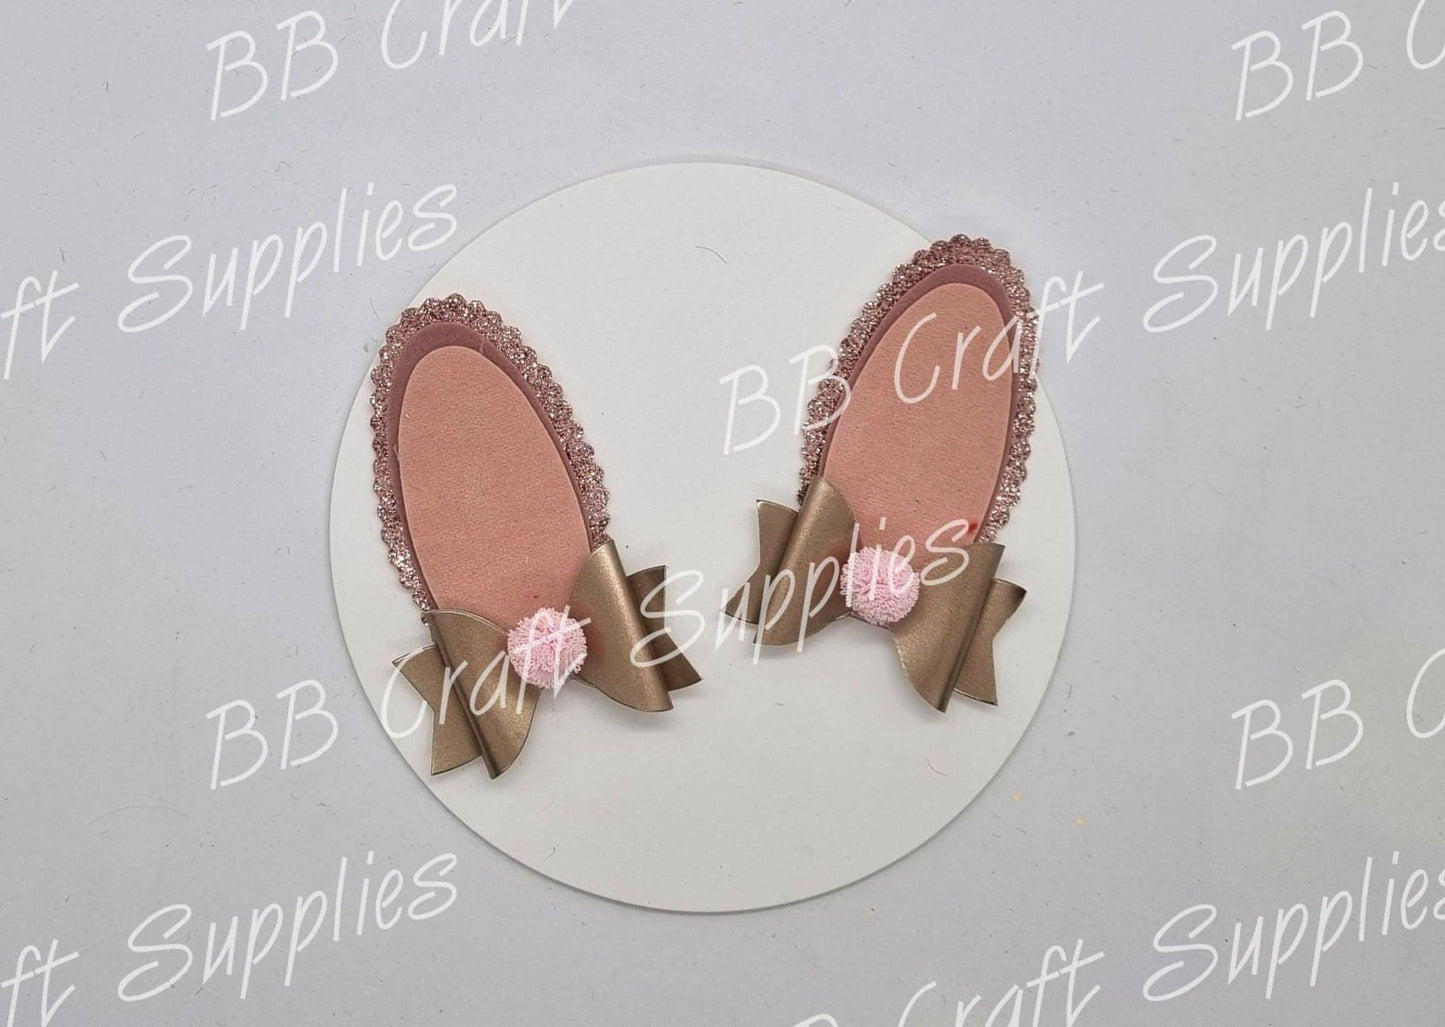 Bunny Ear W/Bow Die - bow, clip, cutting, die, dies, template - Bare Butler Faux Leather Supplies 